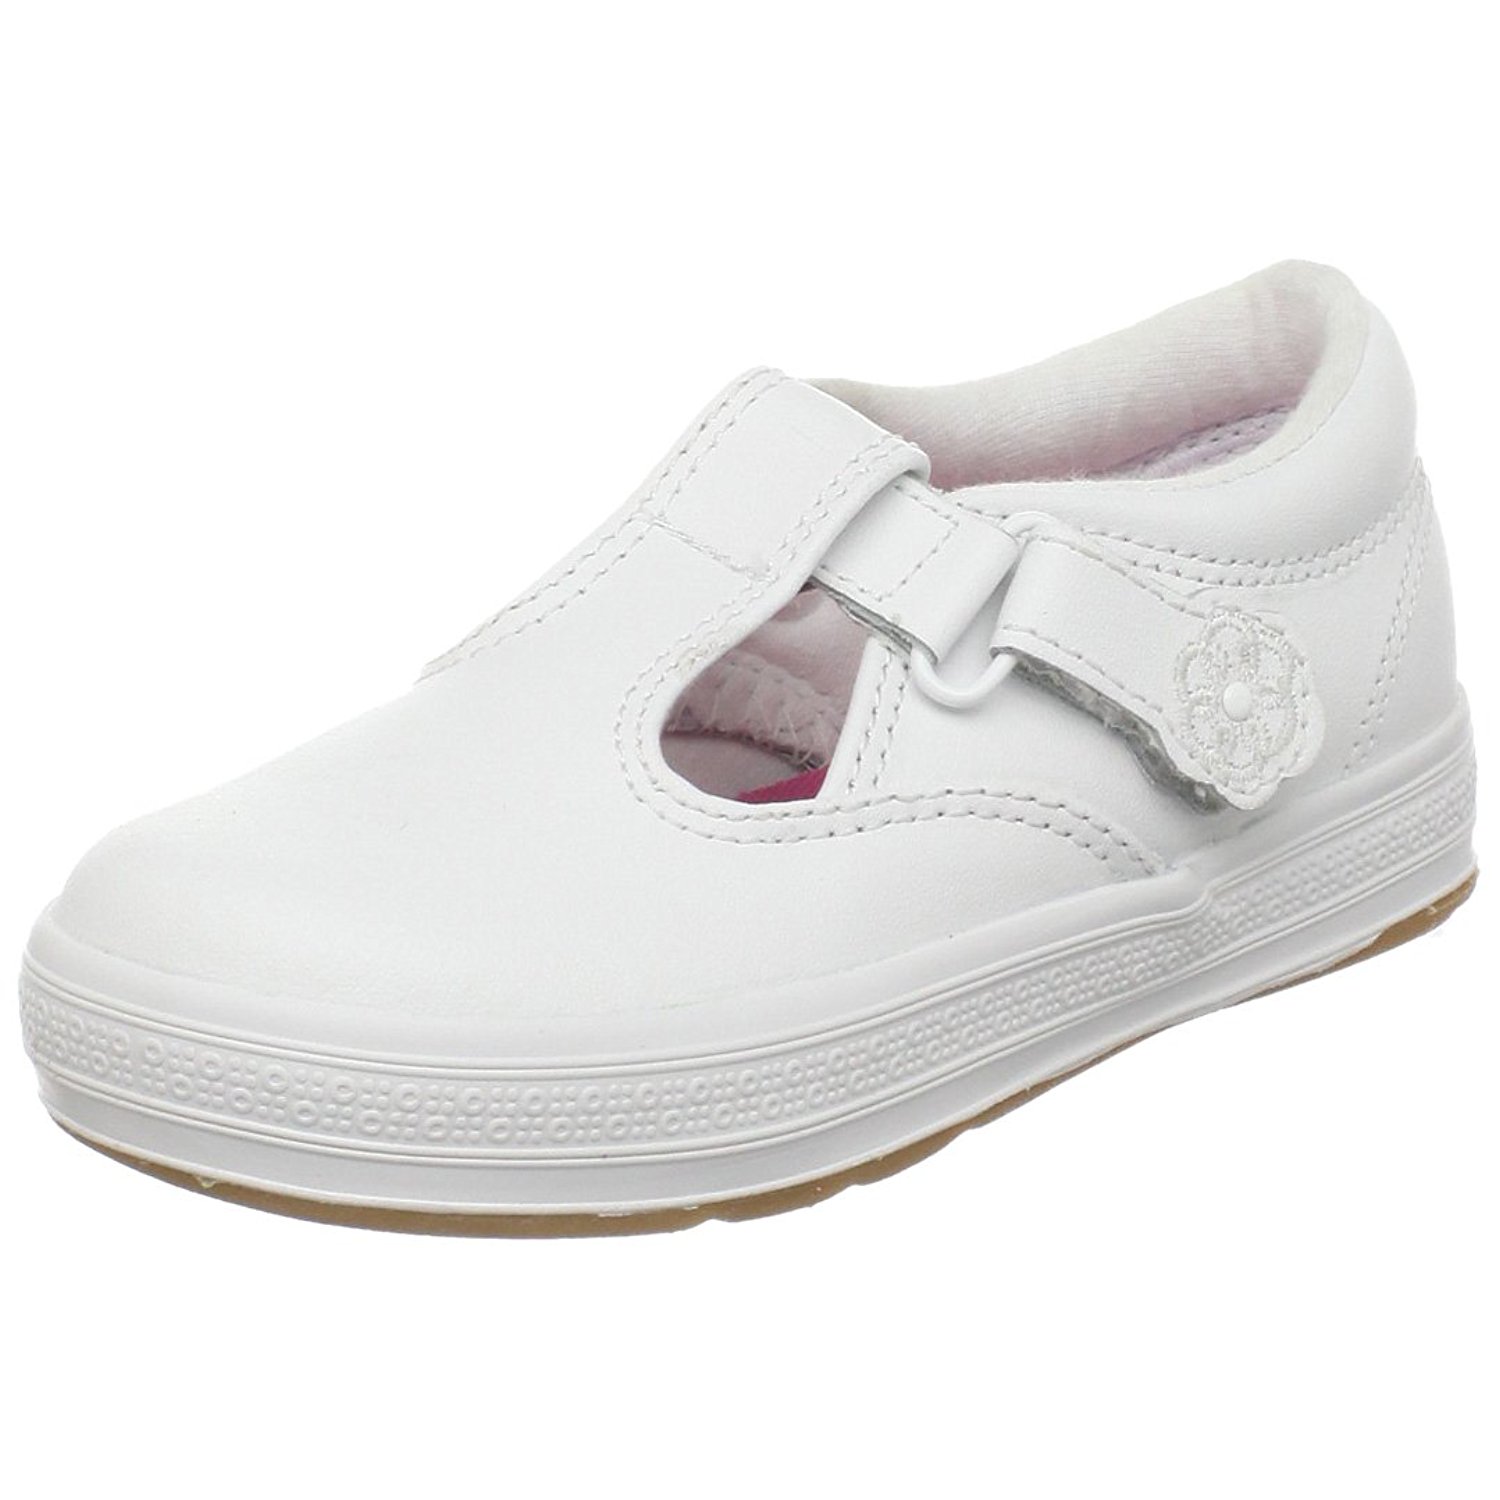 keds rubber shoes price